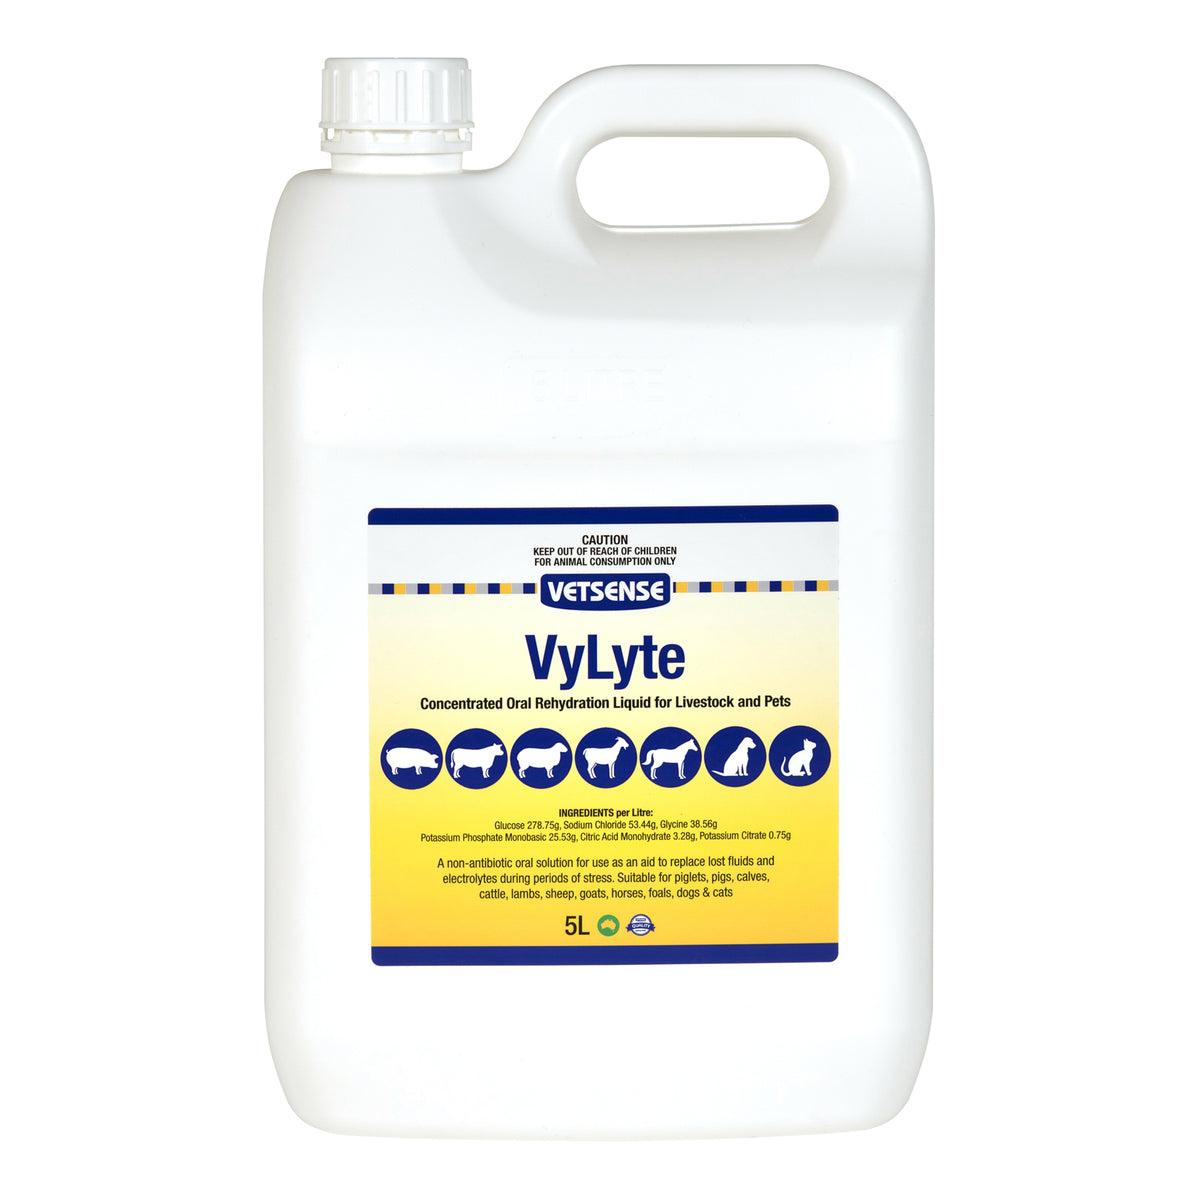 Vetsense VyLyte Concentrated Oral Rehydration Liquid